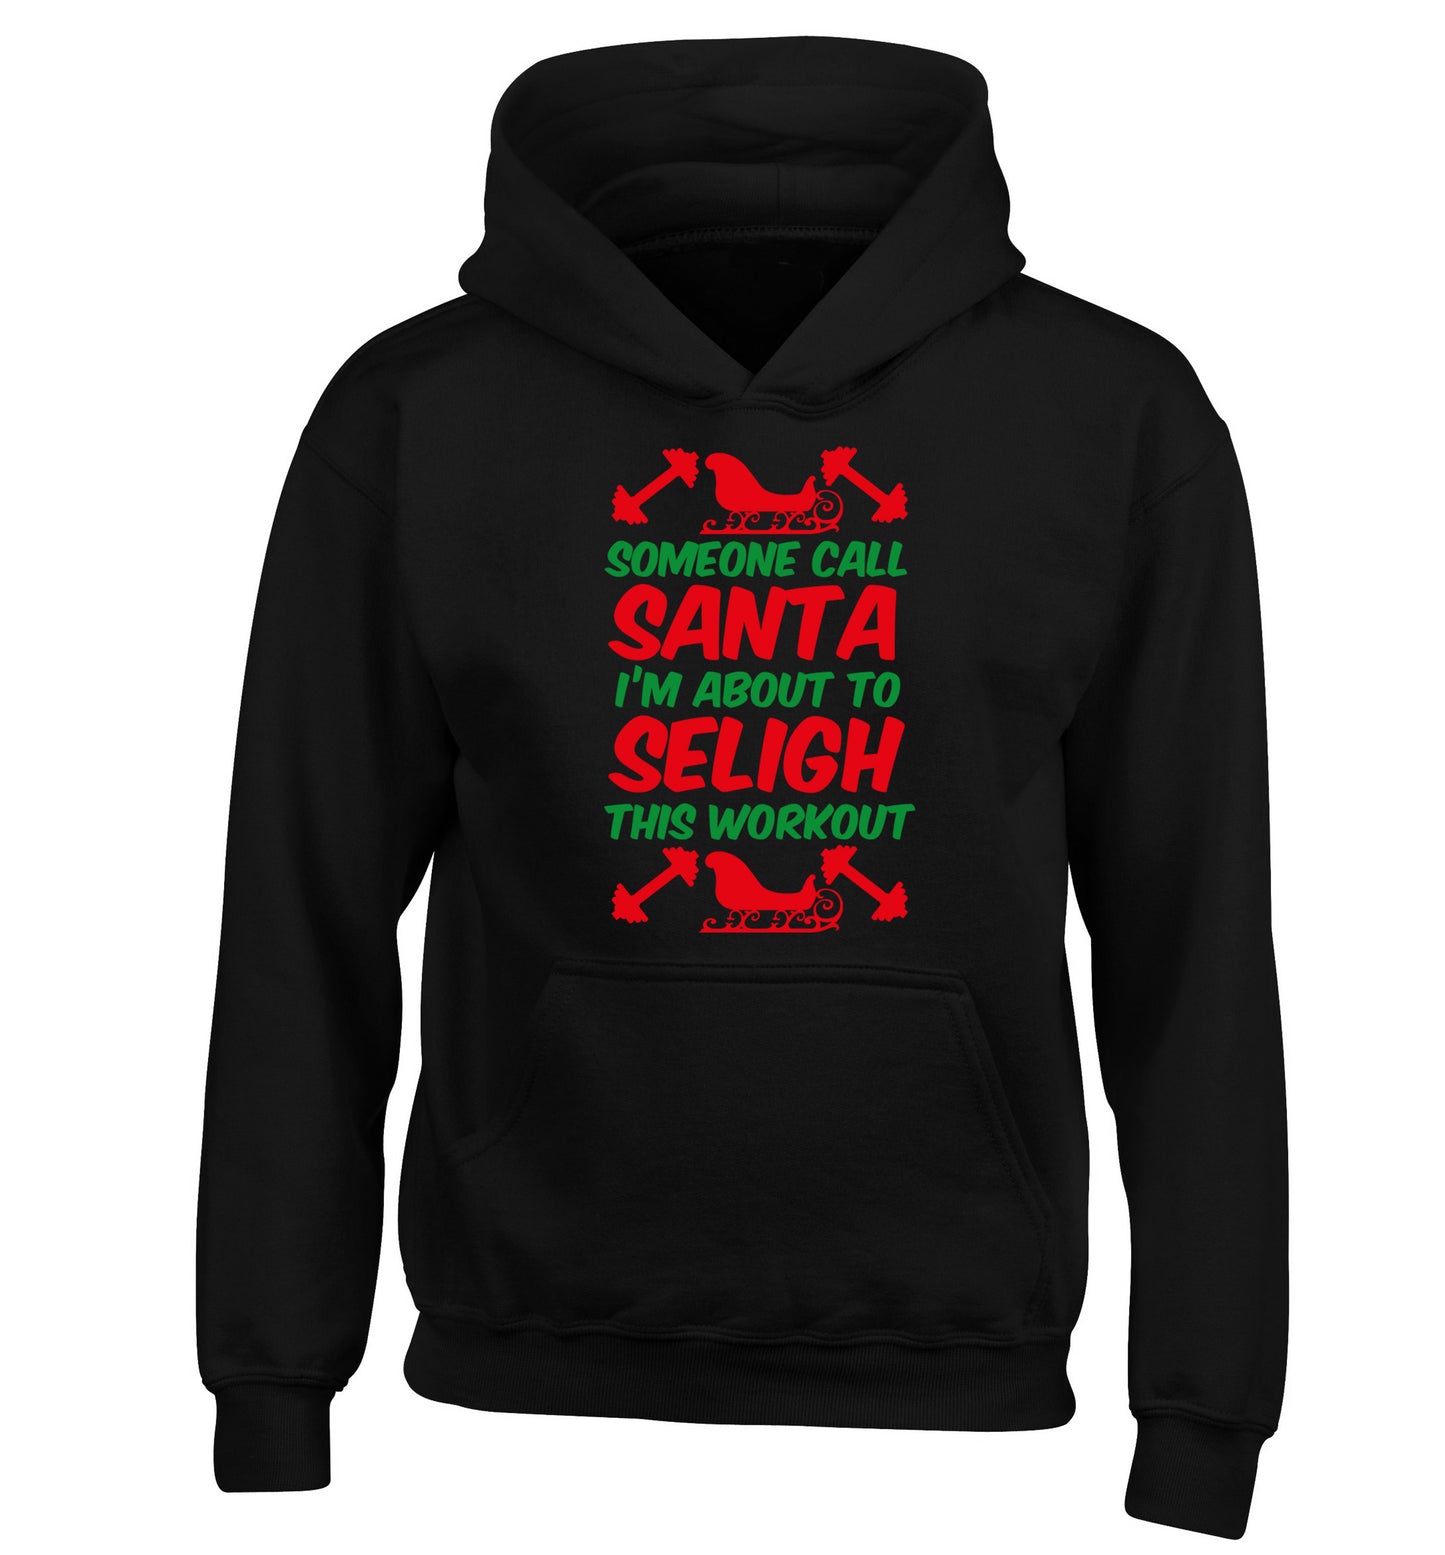 Someone call santa, I'm about to sleigh this workout children's black hoodie 12-14 Years